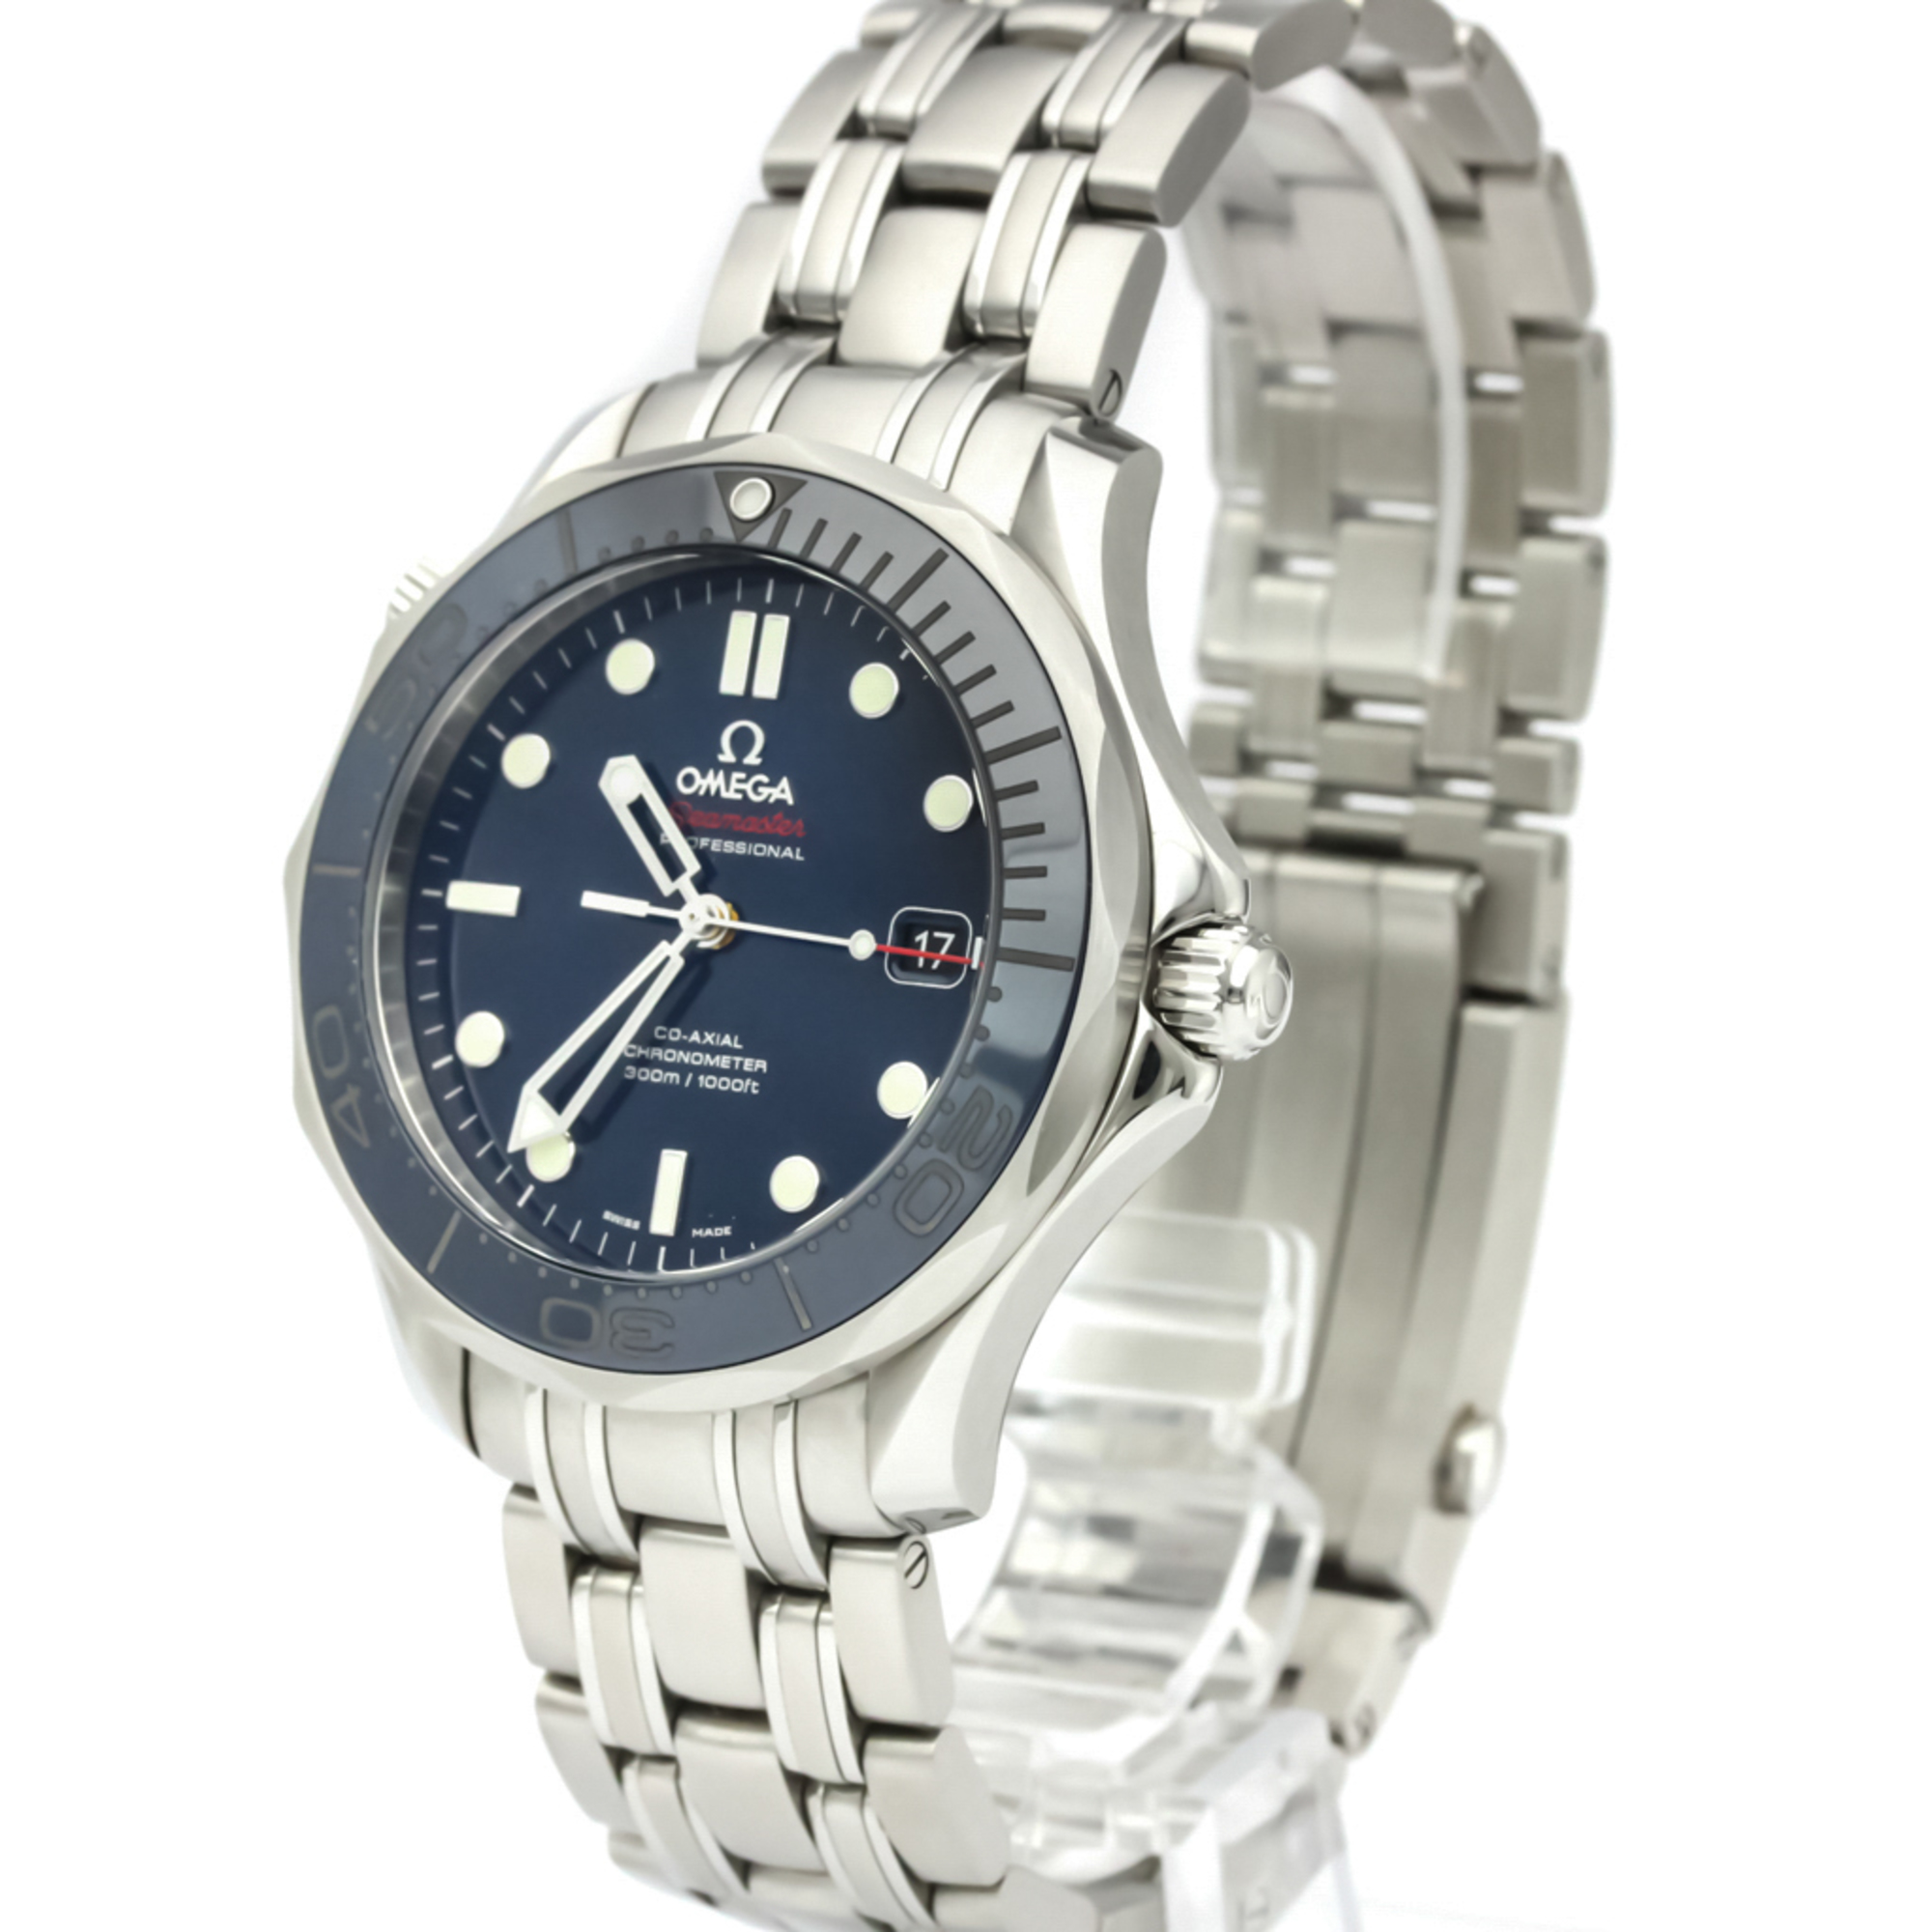 Omega Seamaster Automatic Stainless Steel Men's Sports Watch 212.30.41.20.03.001